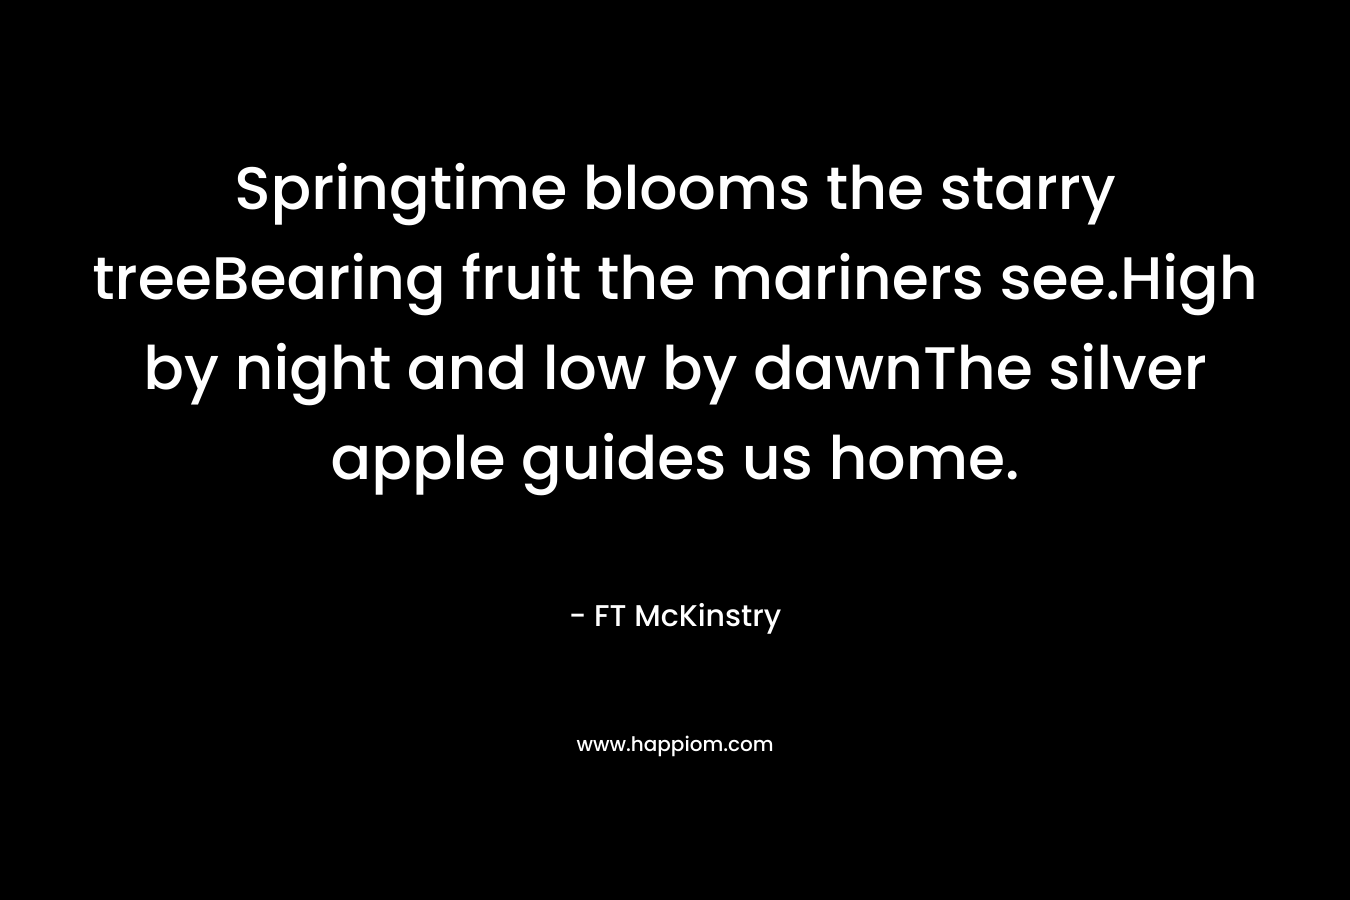 Springtime blooms the starry treeBearing fruit the mariners see.High by night and low by dawnThe silver apple guides us home. – FT McKinstry